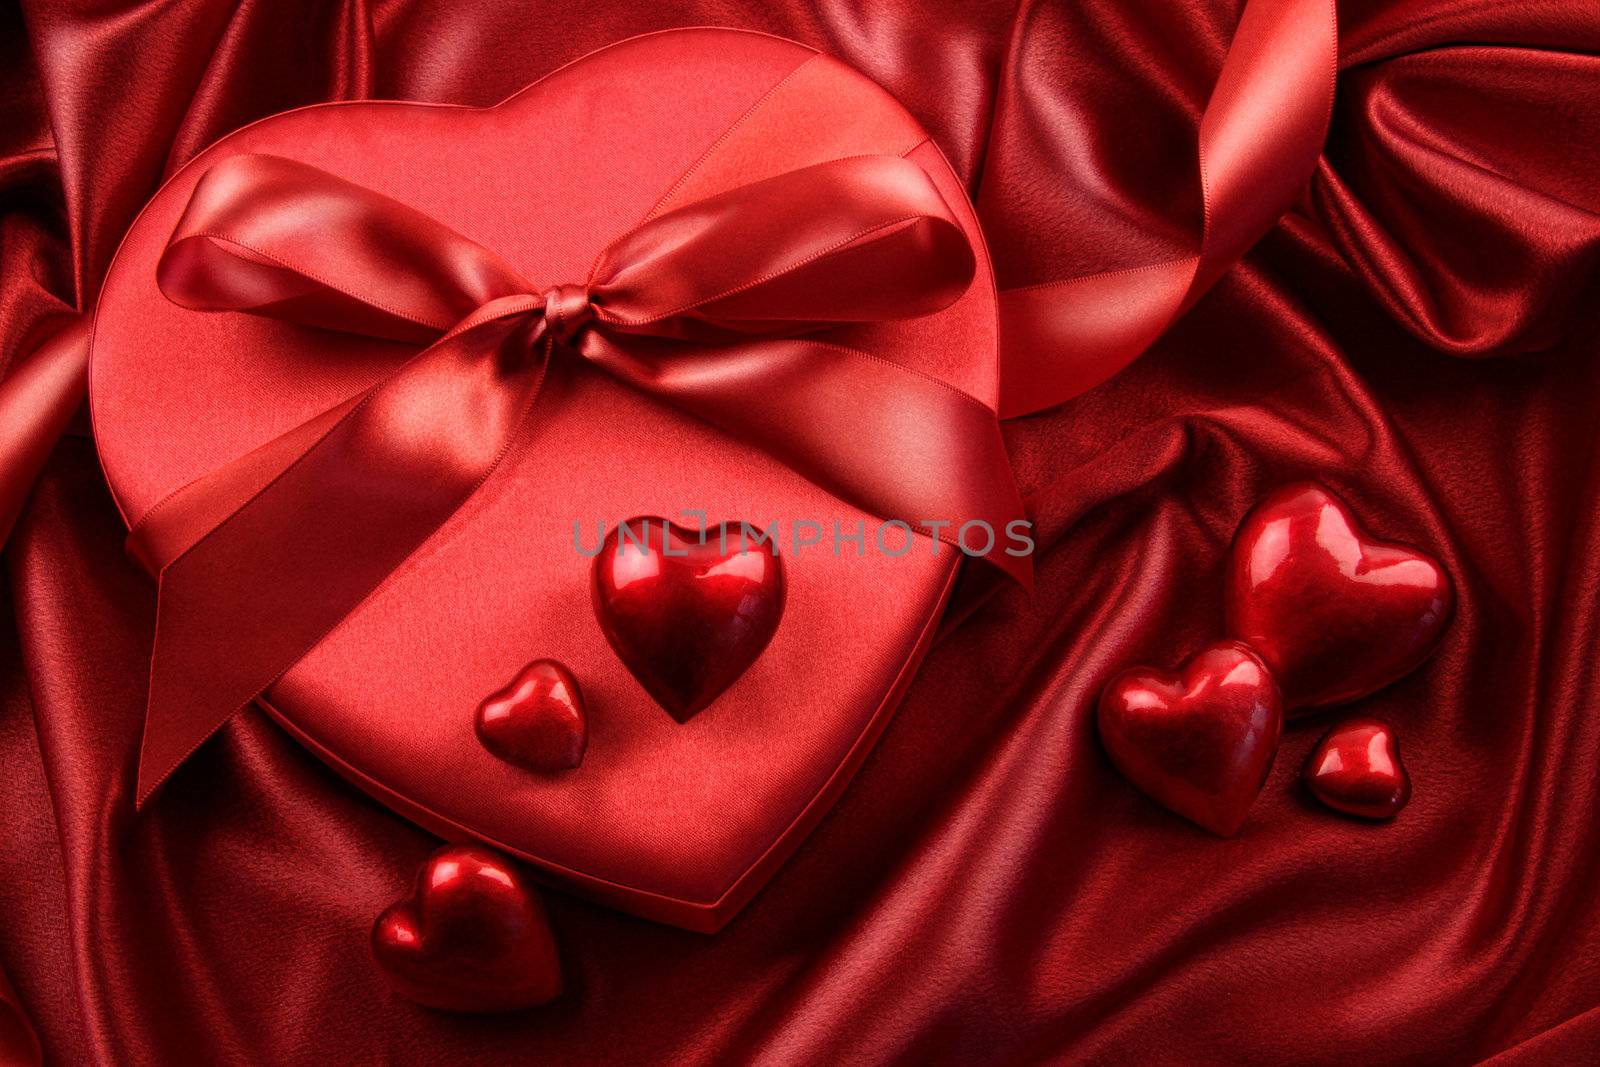 Box of chocolates with ribbons anf hearts by Sandralise